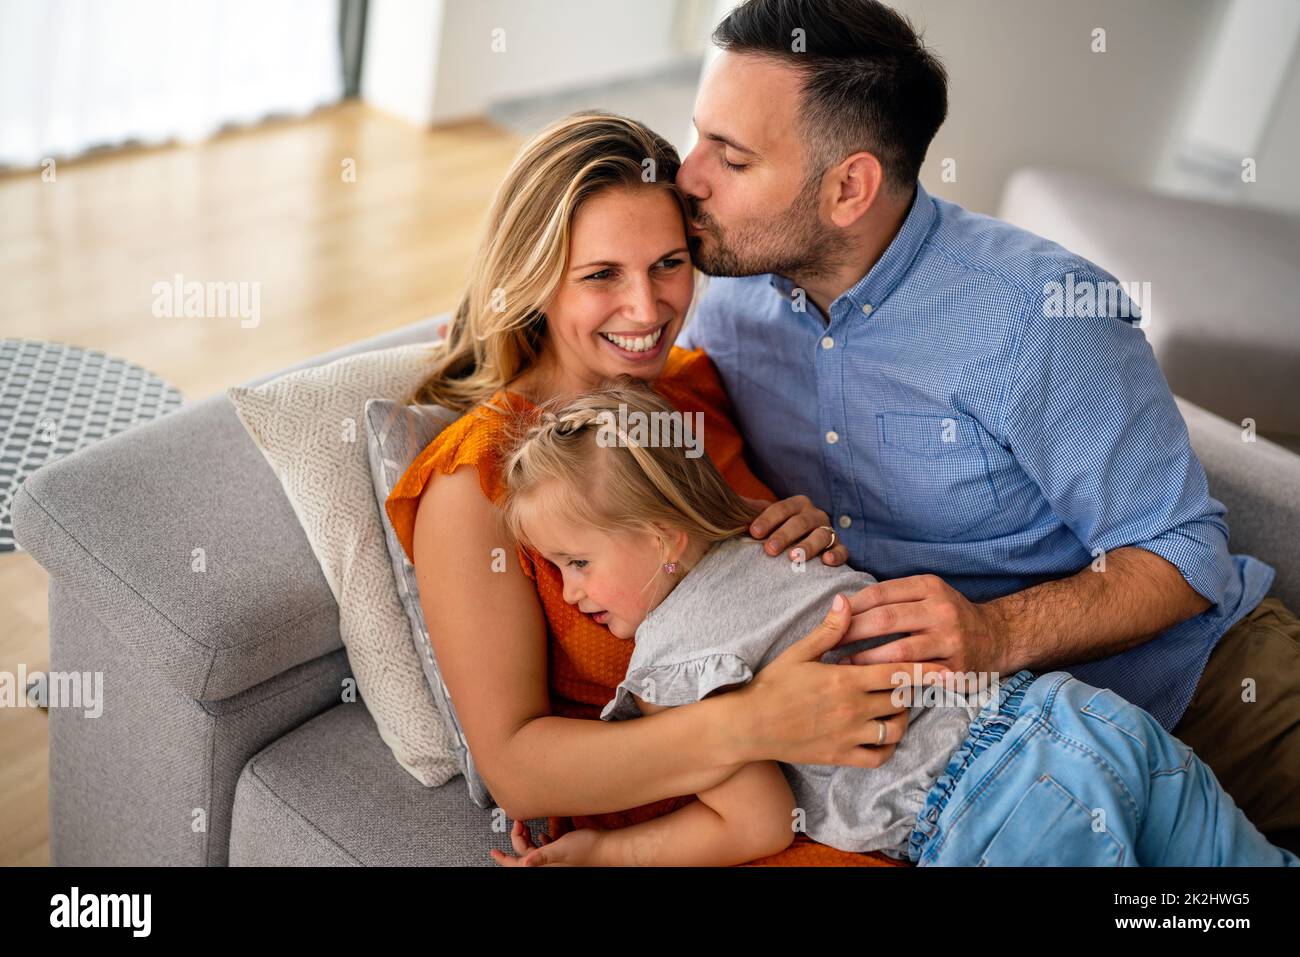 Happy family at home spending time together. People happiness child concept Stock Photo